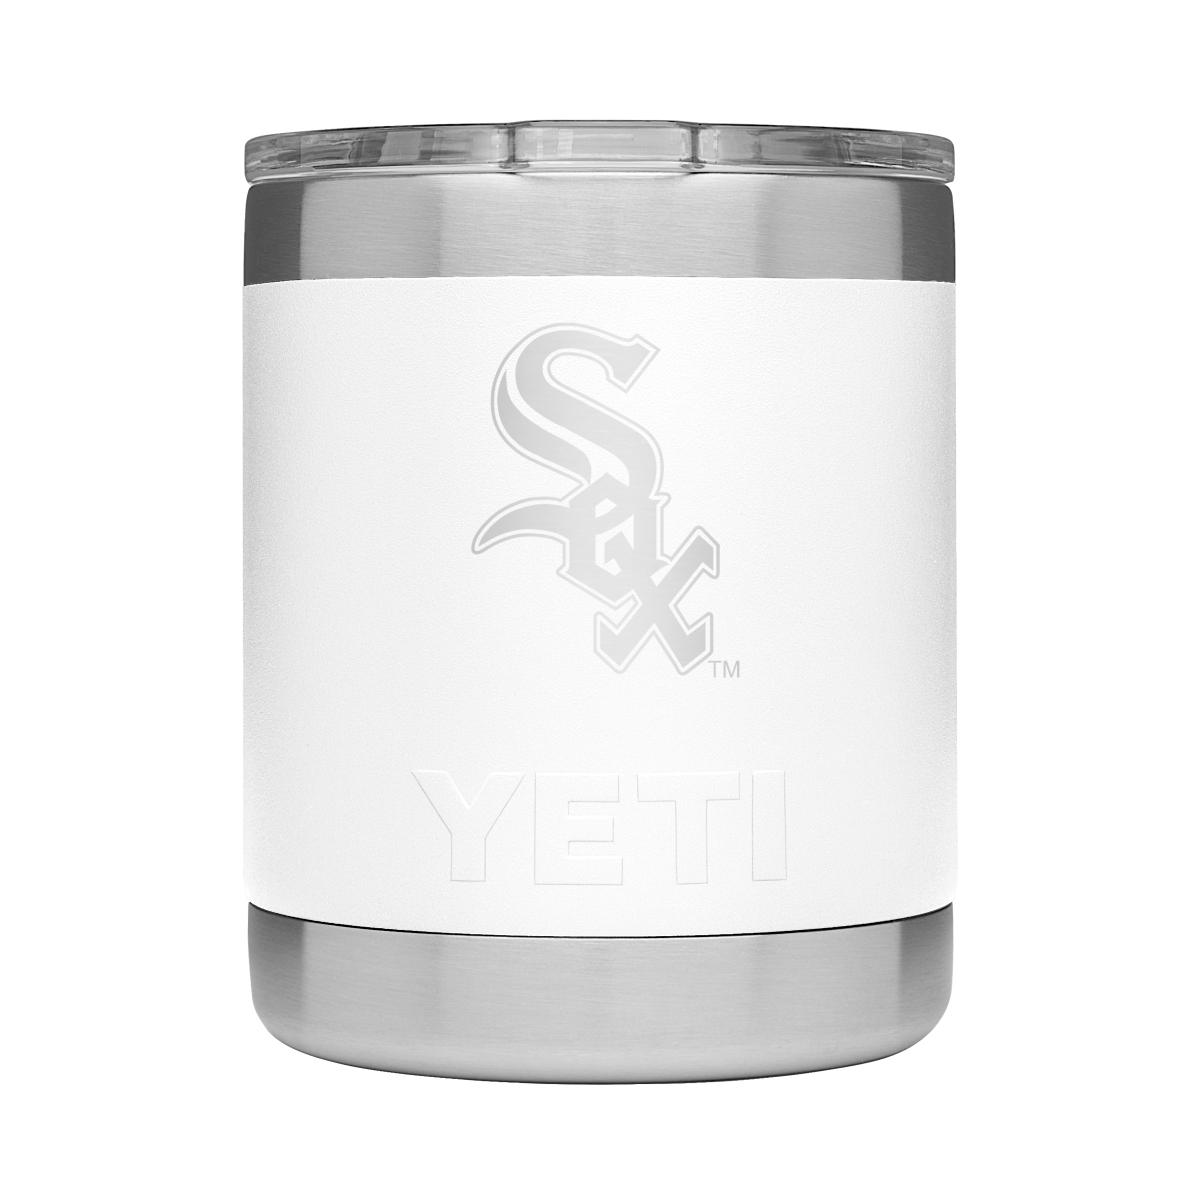 https://www.si.com/.image/t_share/MTk4ODI2MzQ0NzAyODEzNTQ3/mlb-drinkware-dealer-images-10oz-lowball-white-chicago-white-sox-2400x2400-200080.png